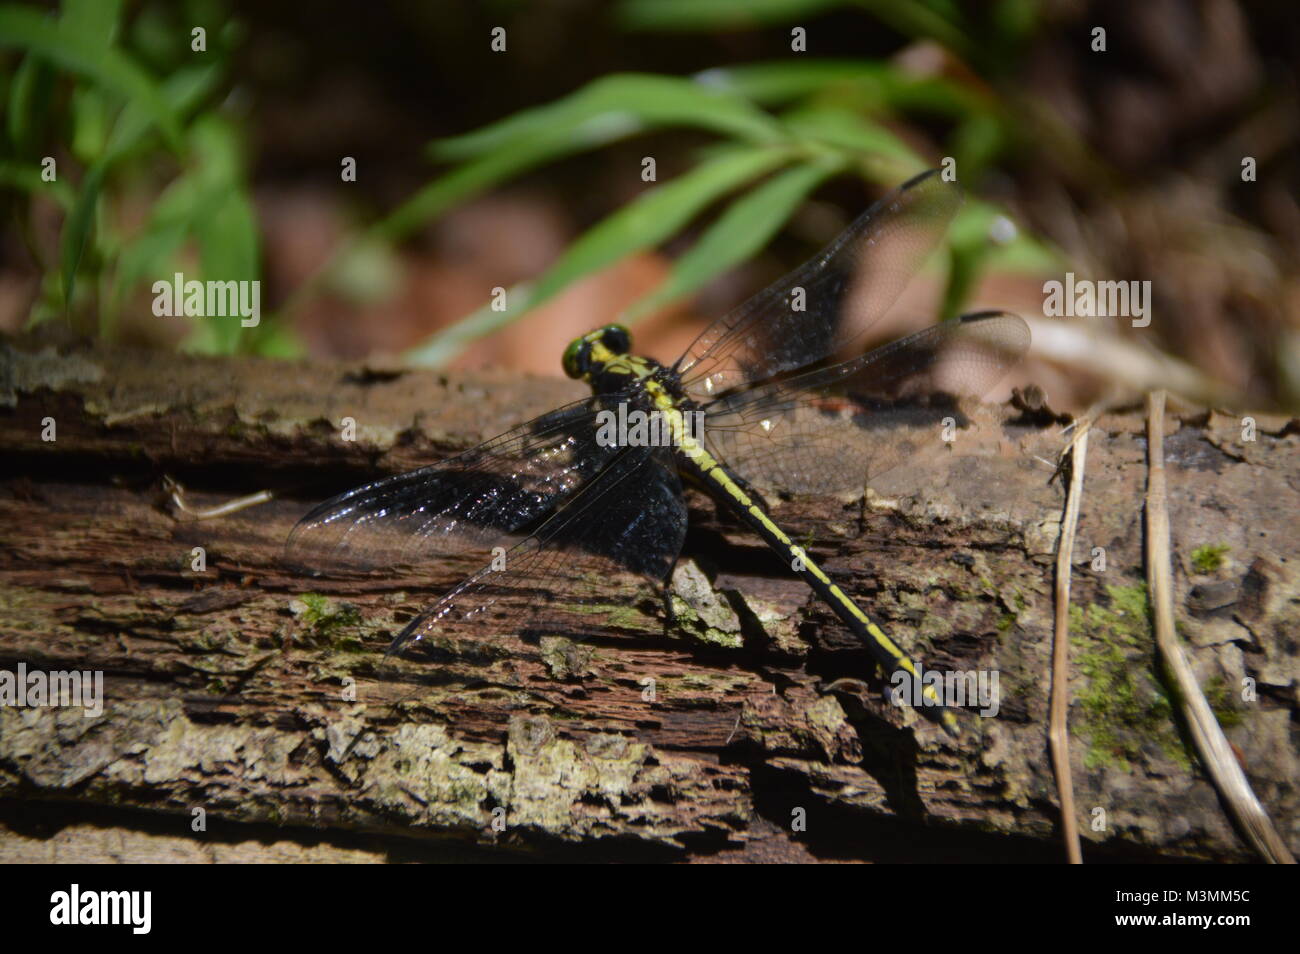 A green and black Dragonfly on log with some greenage in the background of the picture. Stock Photo